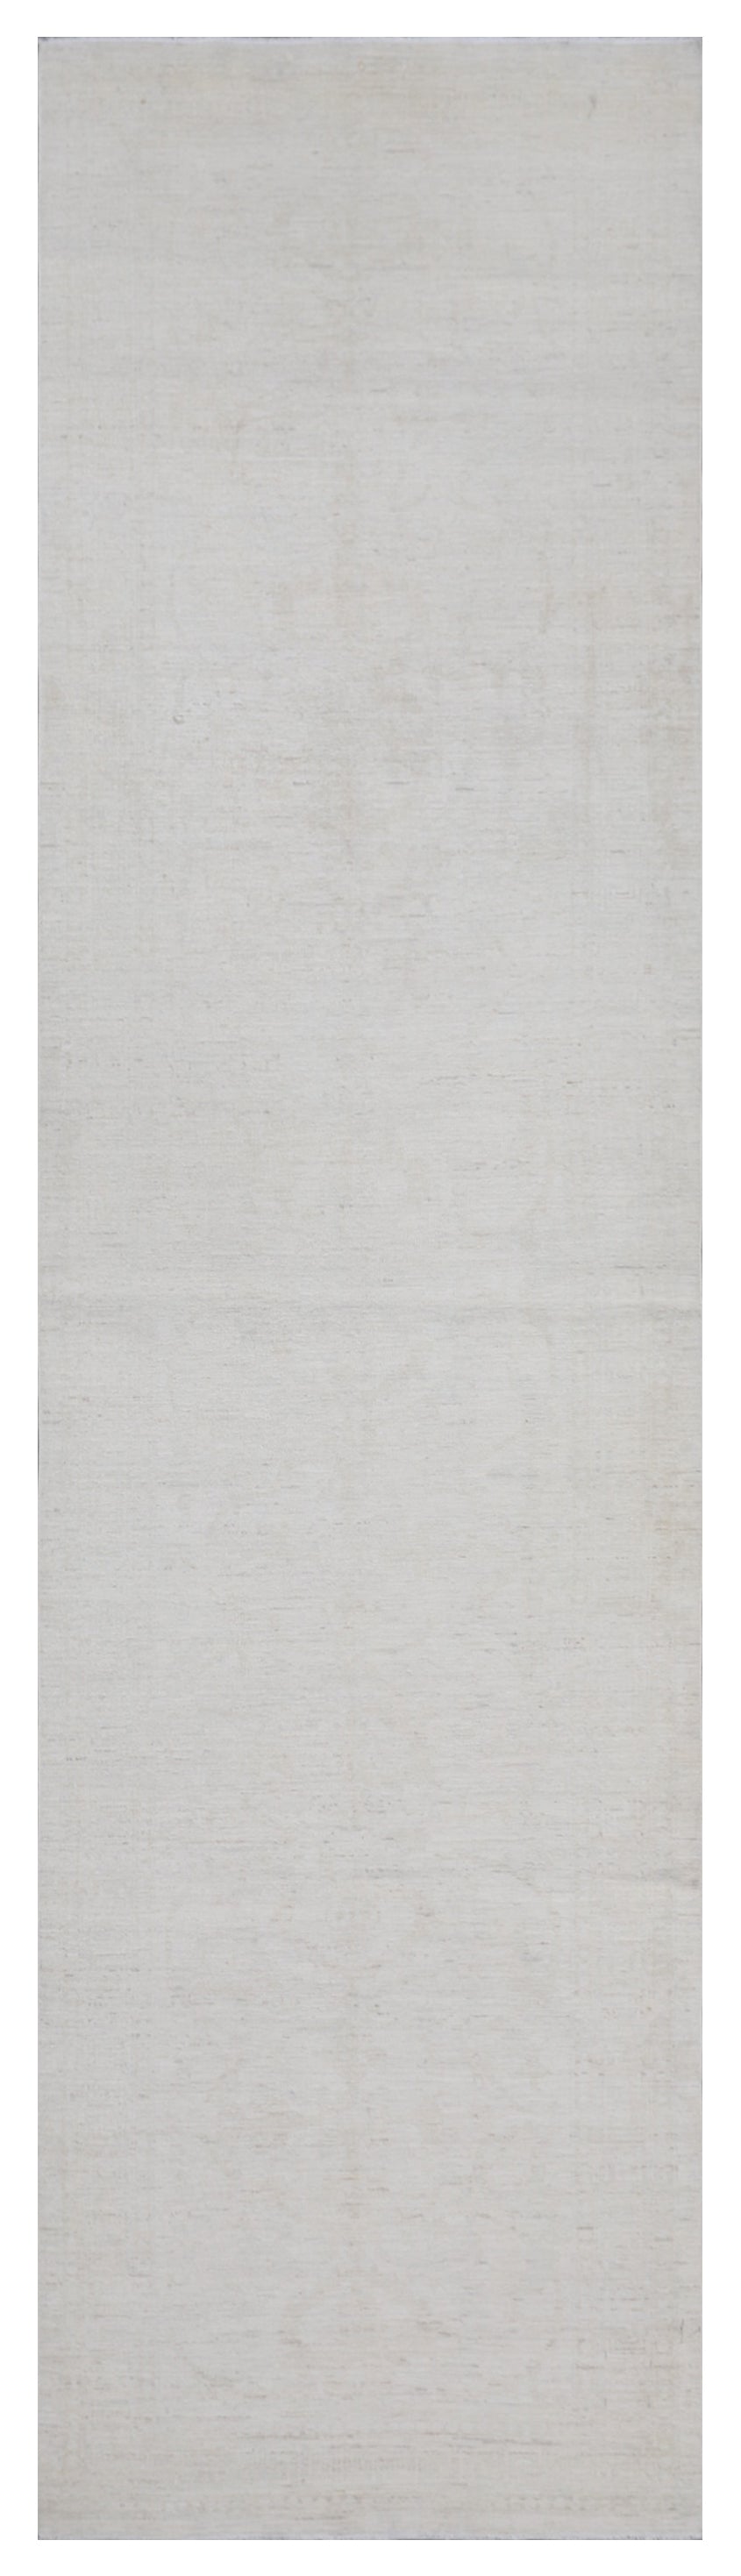 3'x12' Ariana Transitional Washed-Out Runner Rug